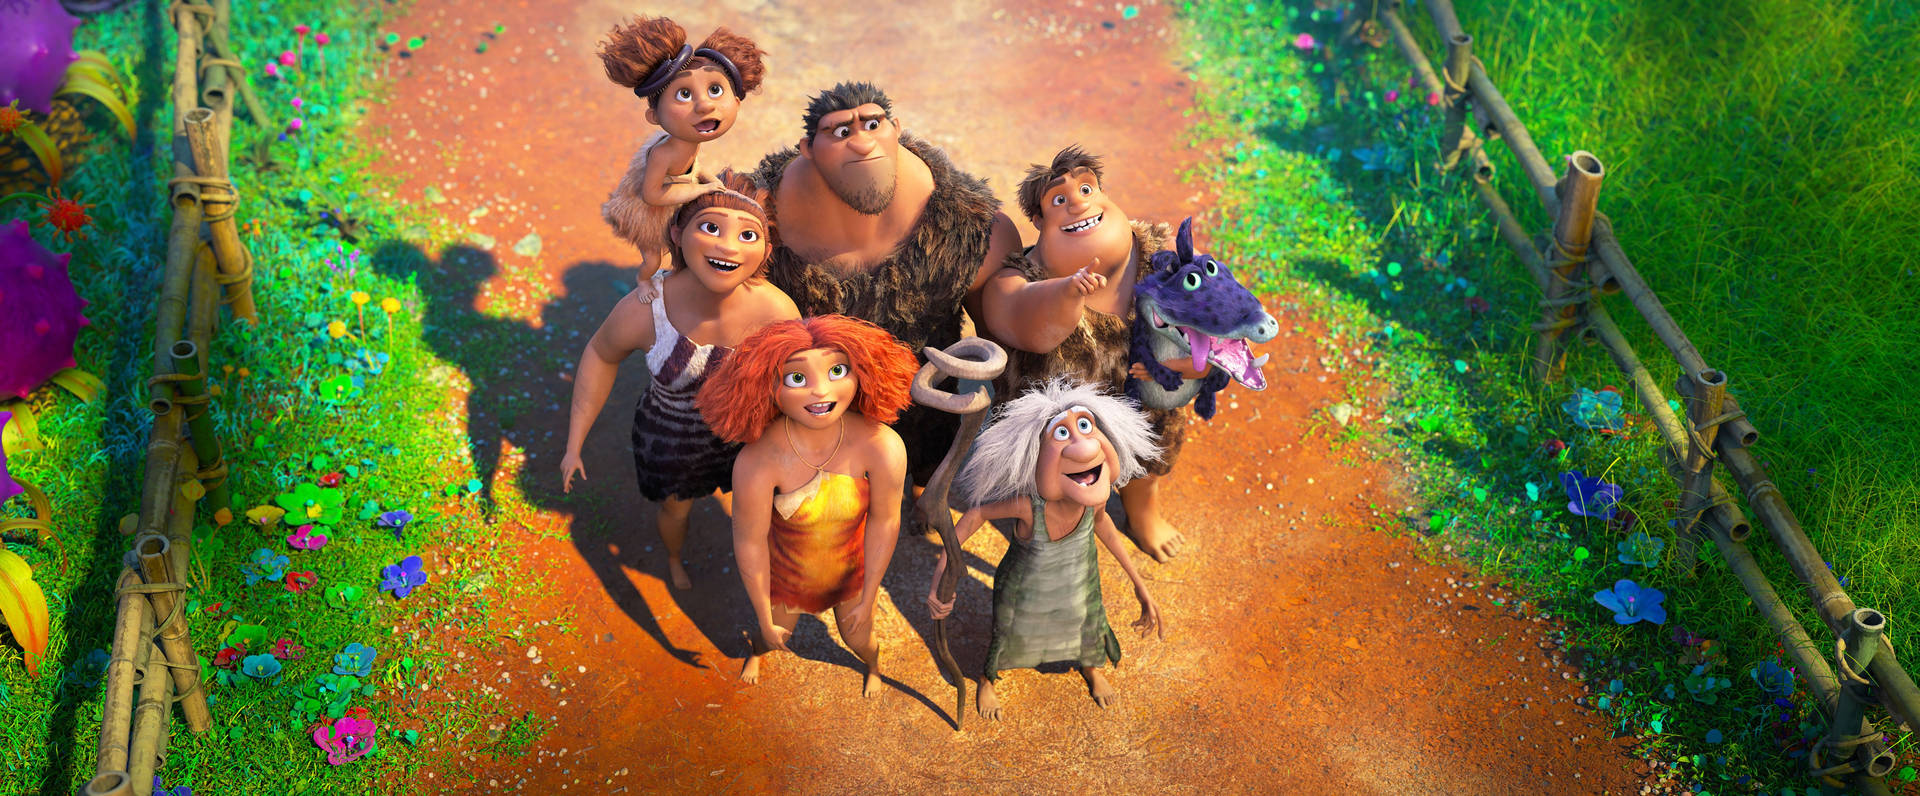 The Croods Characters Looking Up Wallpaper